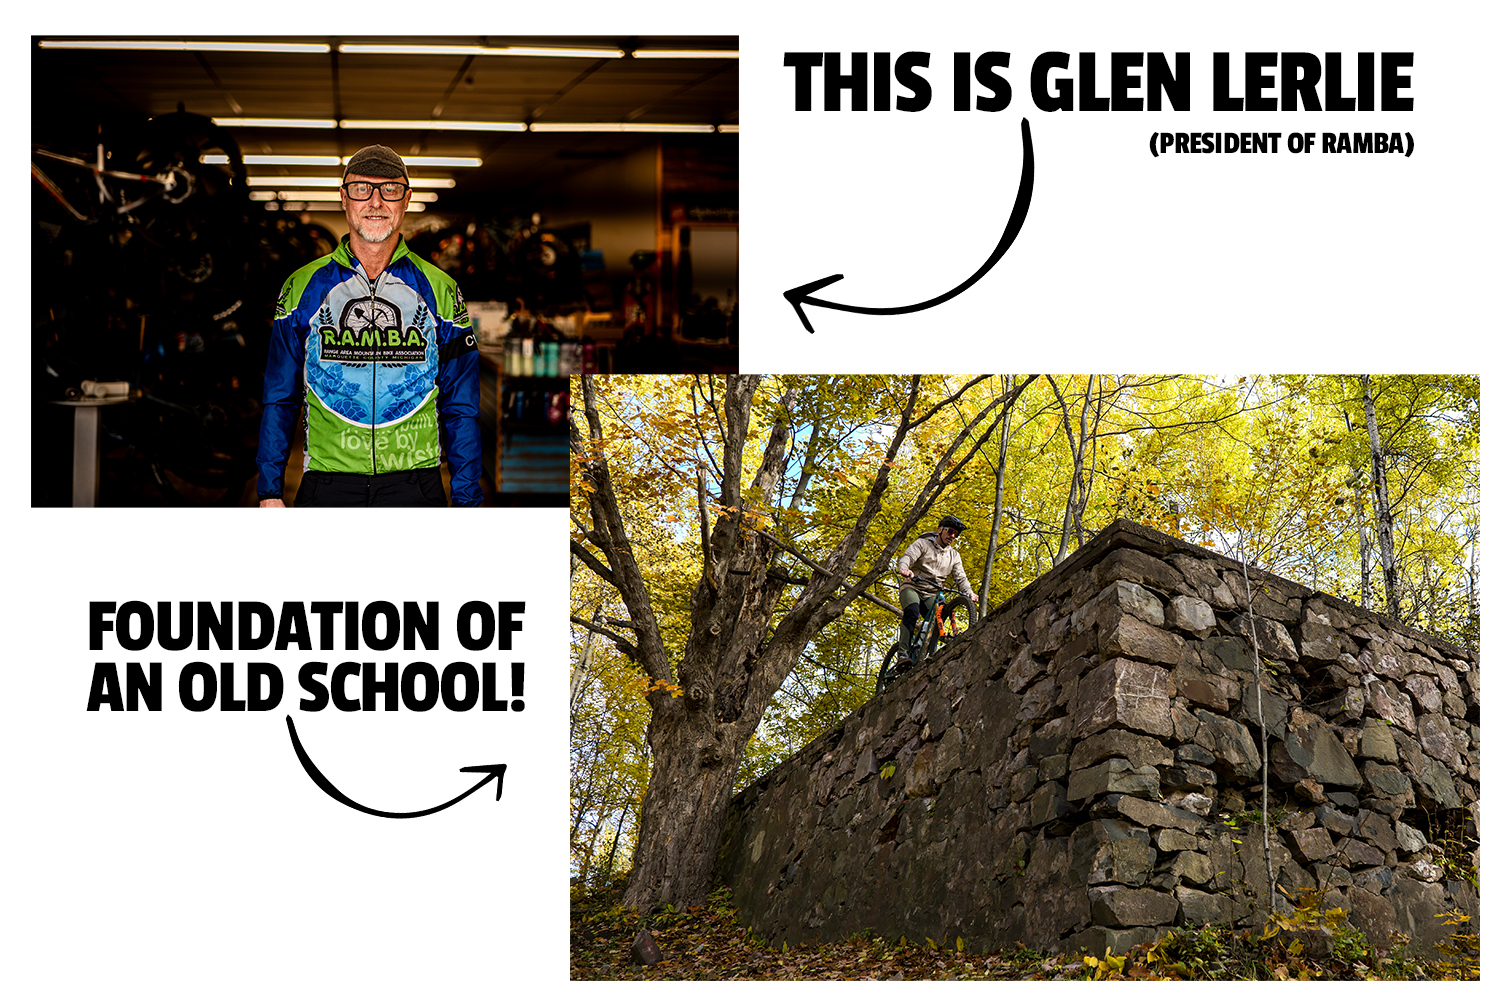 "One portrait of Glen Lehrie with his name and an arrow pointing toward him and a second photo of Brice riding on the edge of an old foundation with text that says 'This is an old school foundation.' with an arrow.""